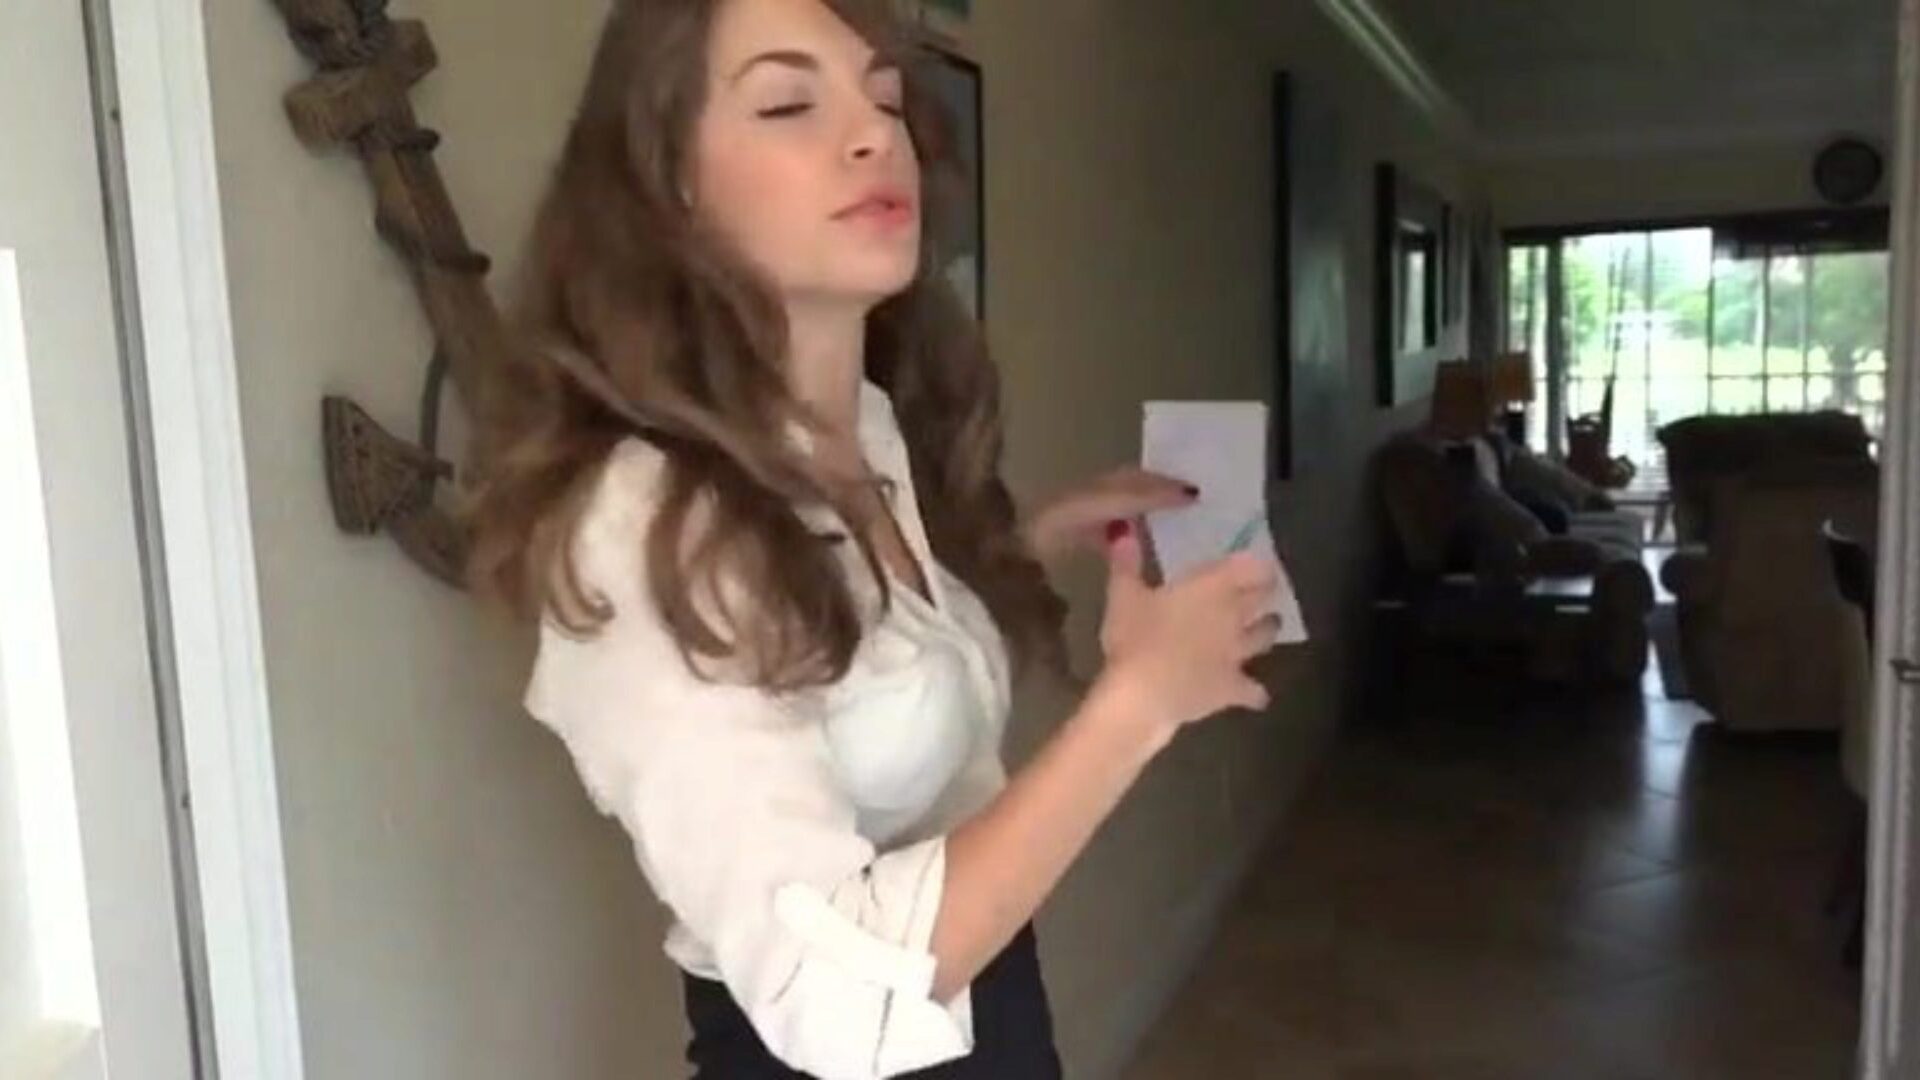 PropertySex - Hawt real estate agent flirts with client and bonks his large shlong